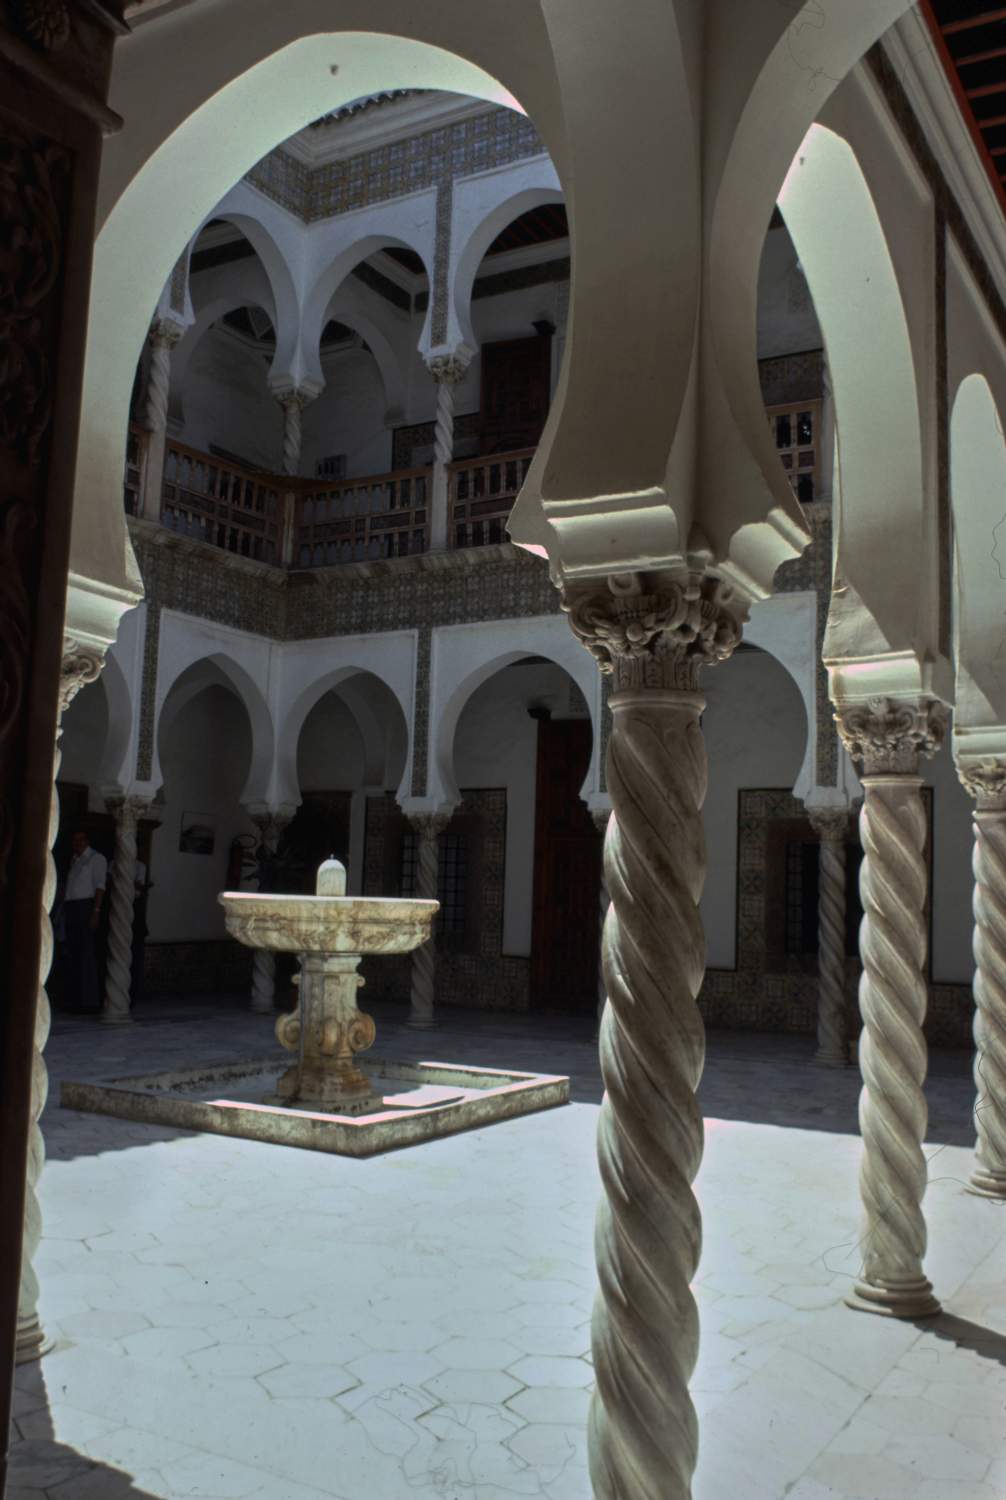 First-floor view to the courtyard fountain